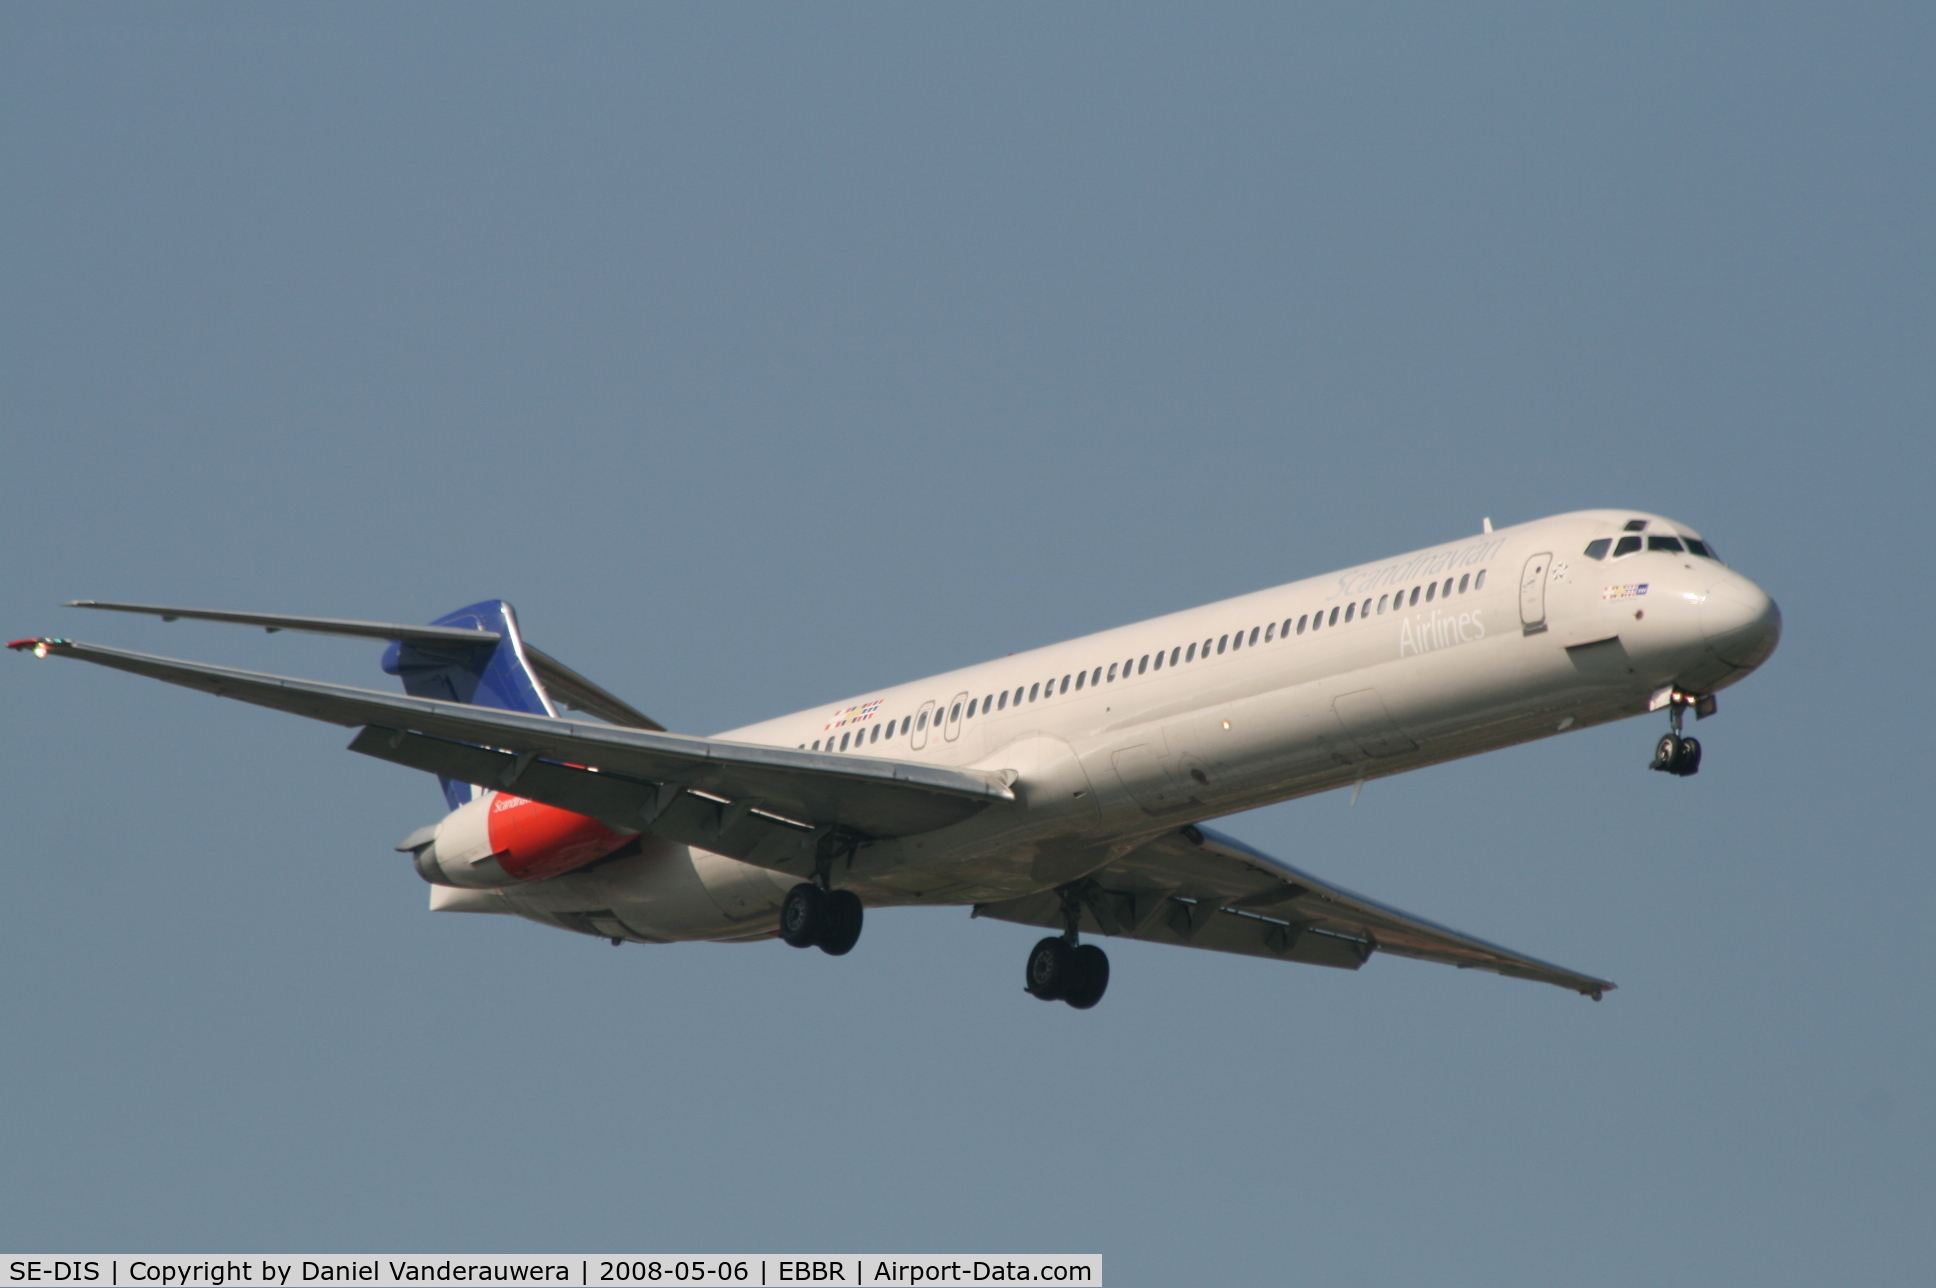 SE-DIS, 1991 McDonnell Douglas MD-81 (DC-9-81) C/N 53006, arrival of flight SK593 to rwy 02